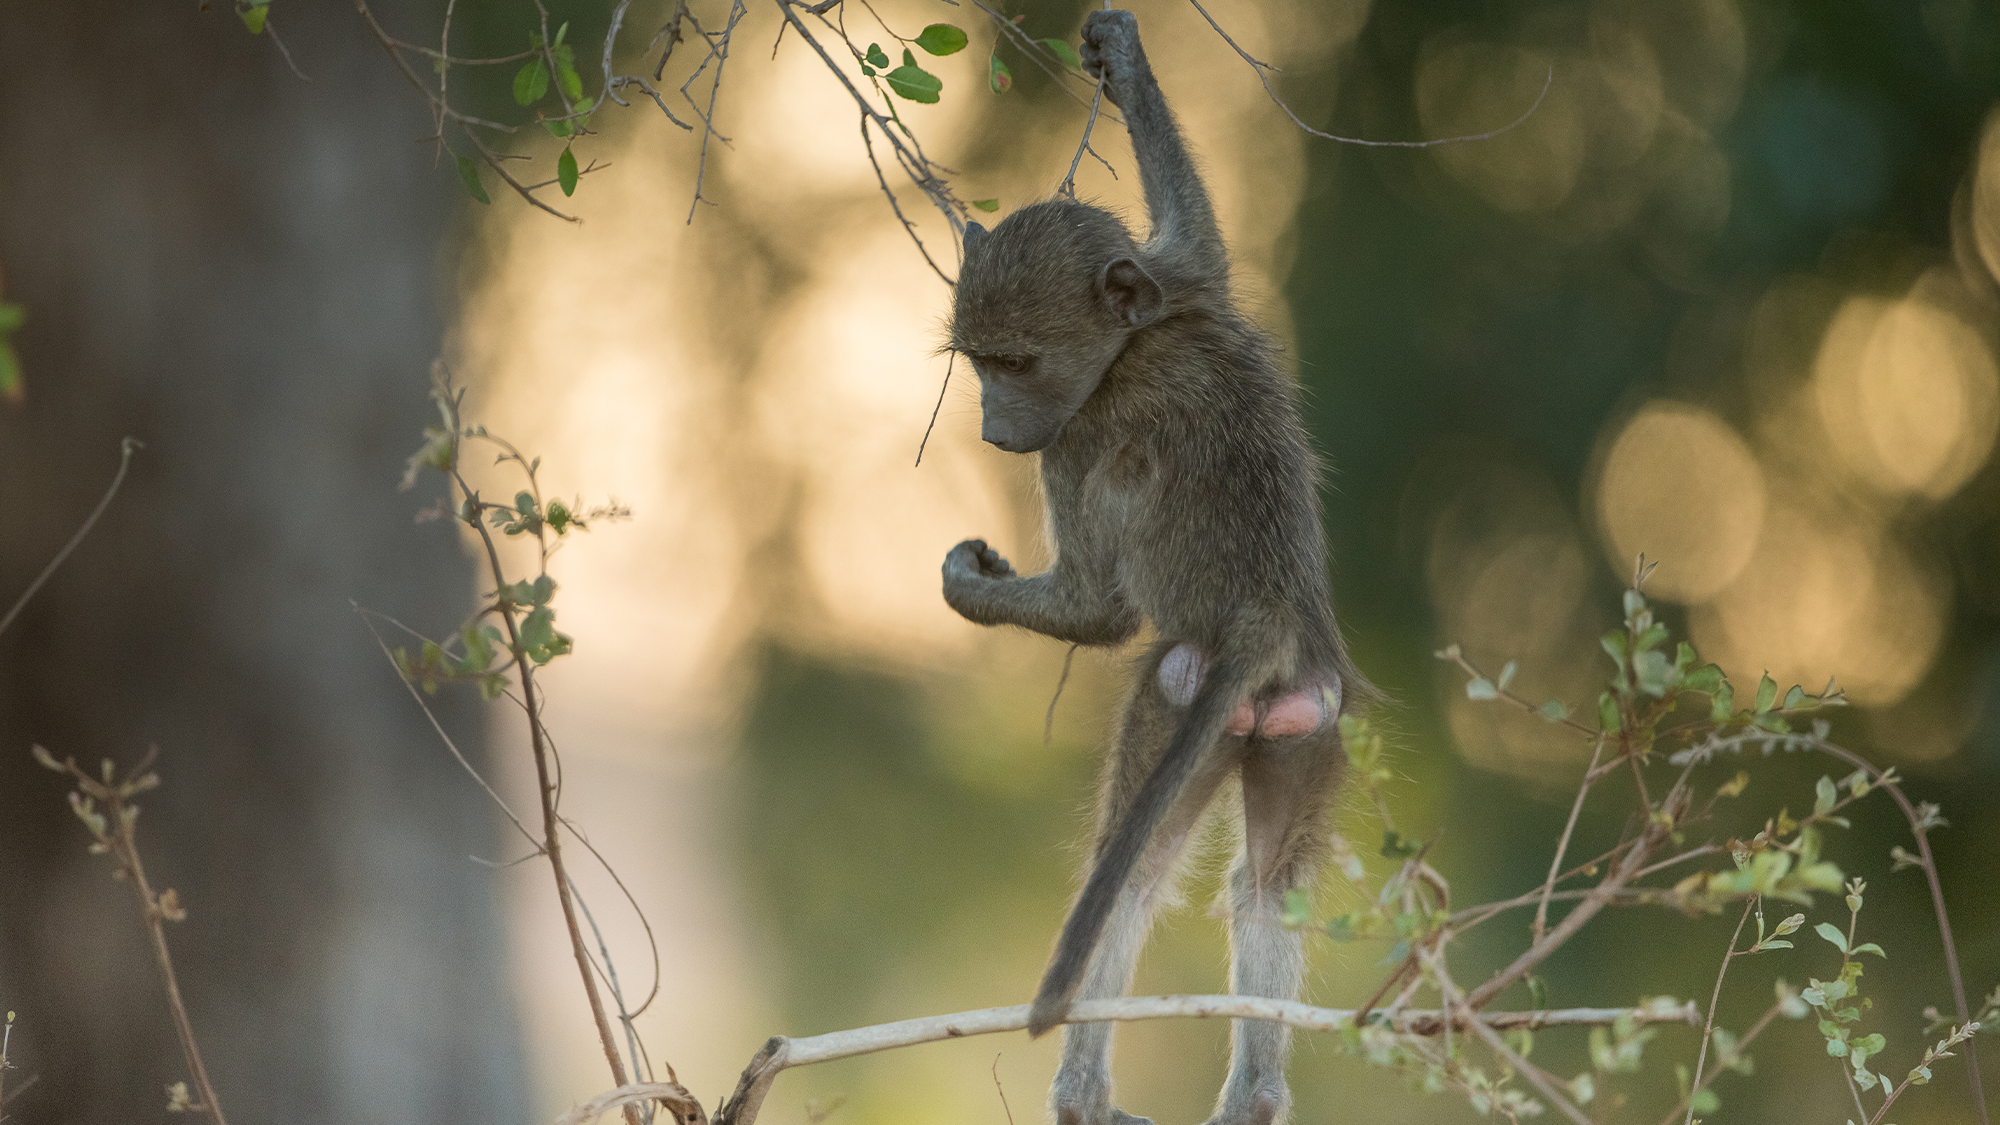 Baboons can recover from childhood trauma with a little help from their friends